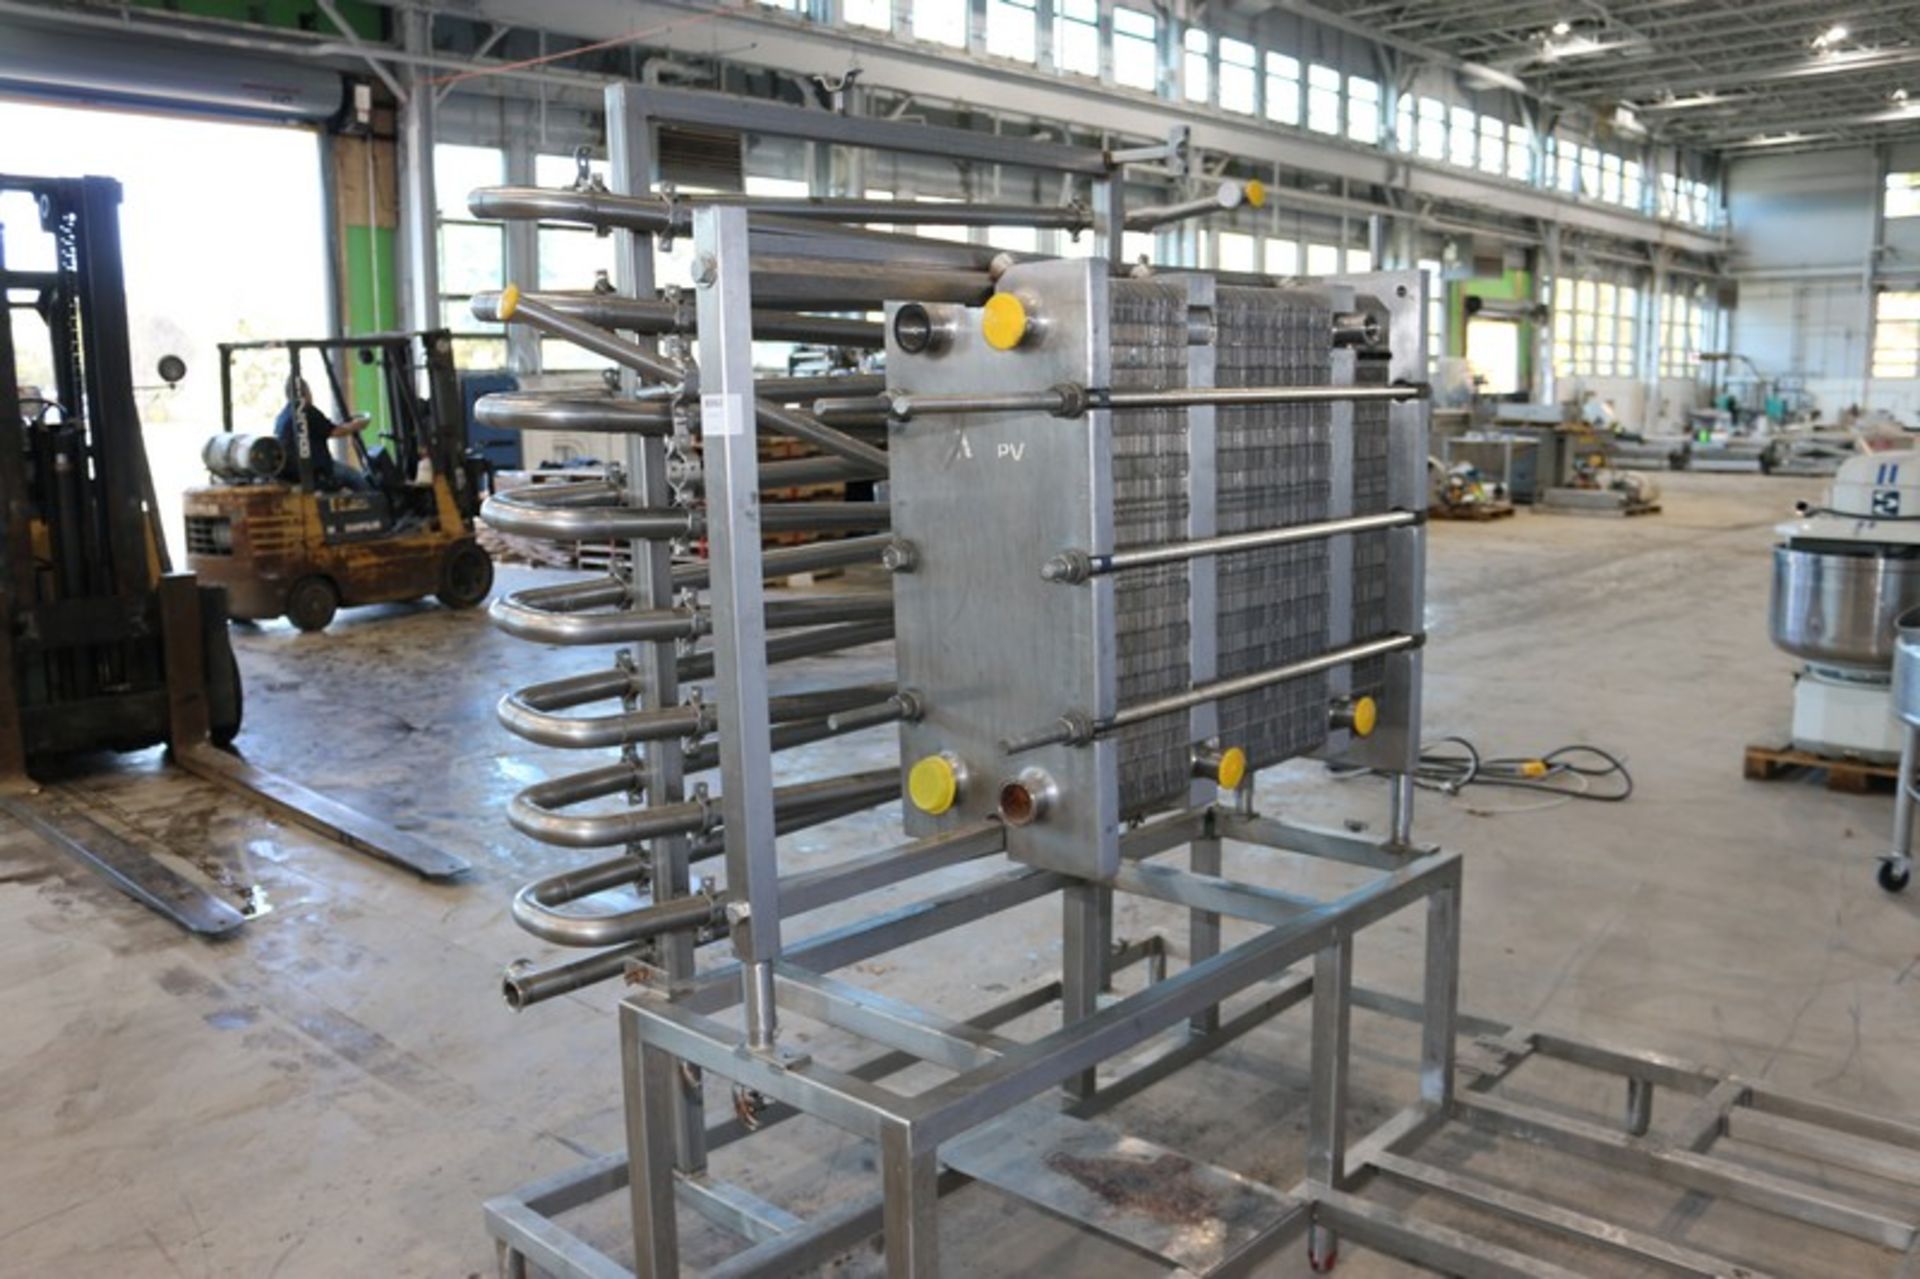 S/S Pasteurization Skid, Includes APV 3-Section Plate Heat Exchanger, M/N SP250-S, S/N 20332, with - Image 5 of 10